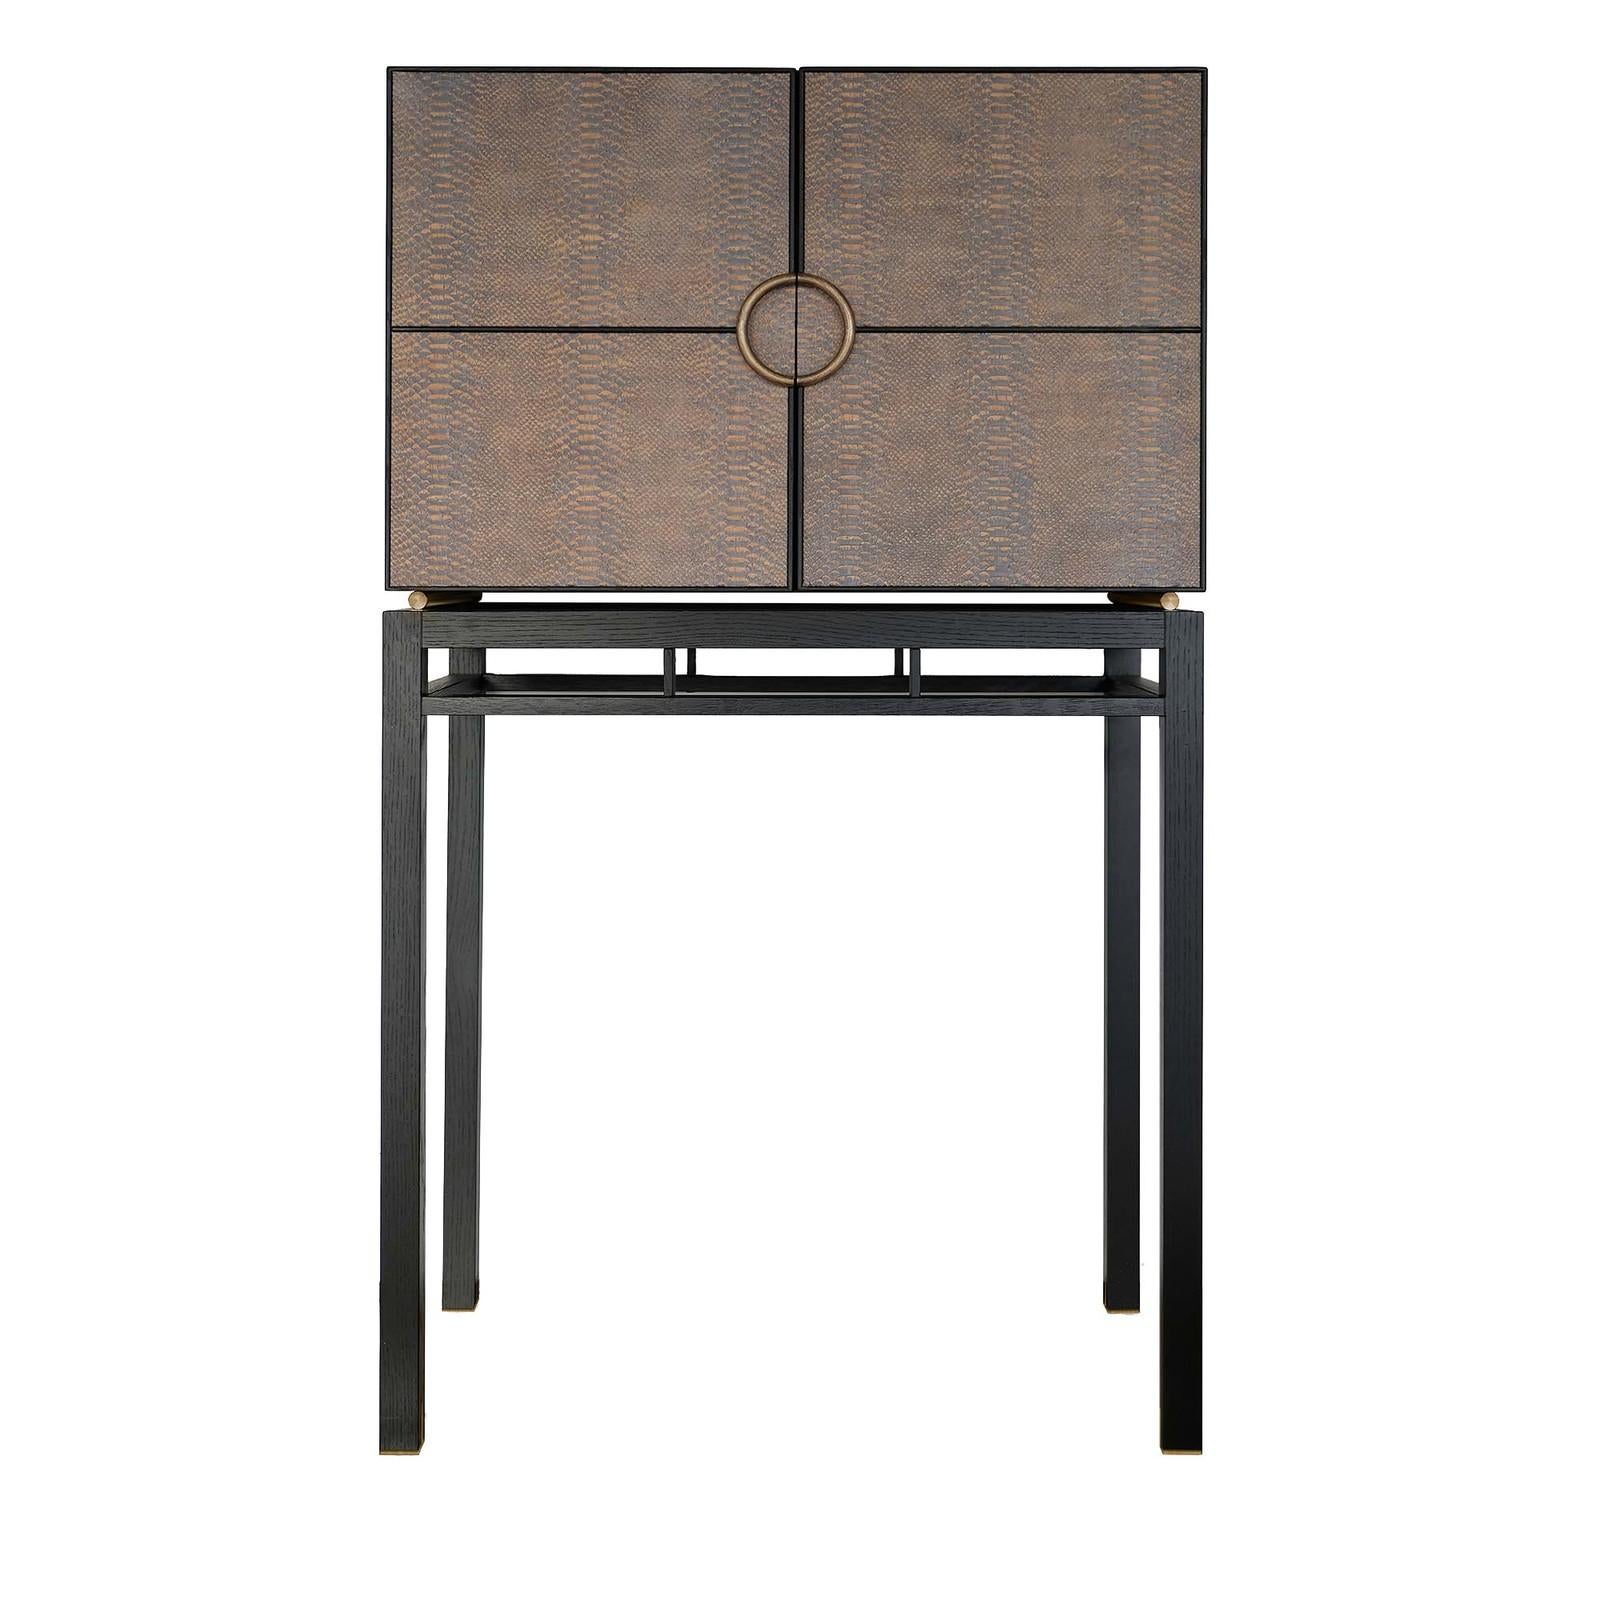 The internal organization of the space, the open and slender design of the base, and the strong architectural silhouette of this bar cabinet evokes sleek midcentury aesthetic, elevated to a modern style with the use of an exclusive finish. Made in